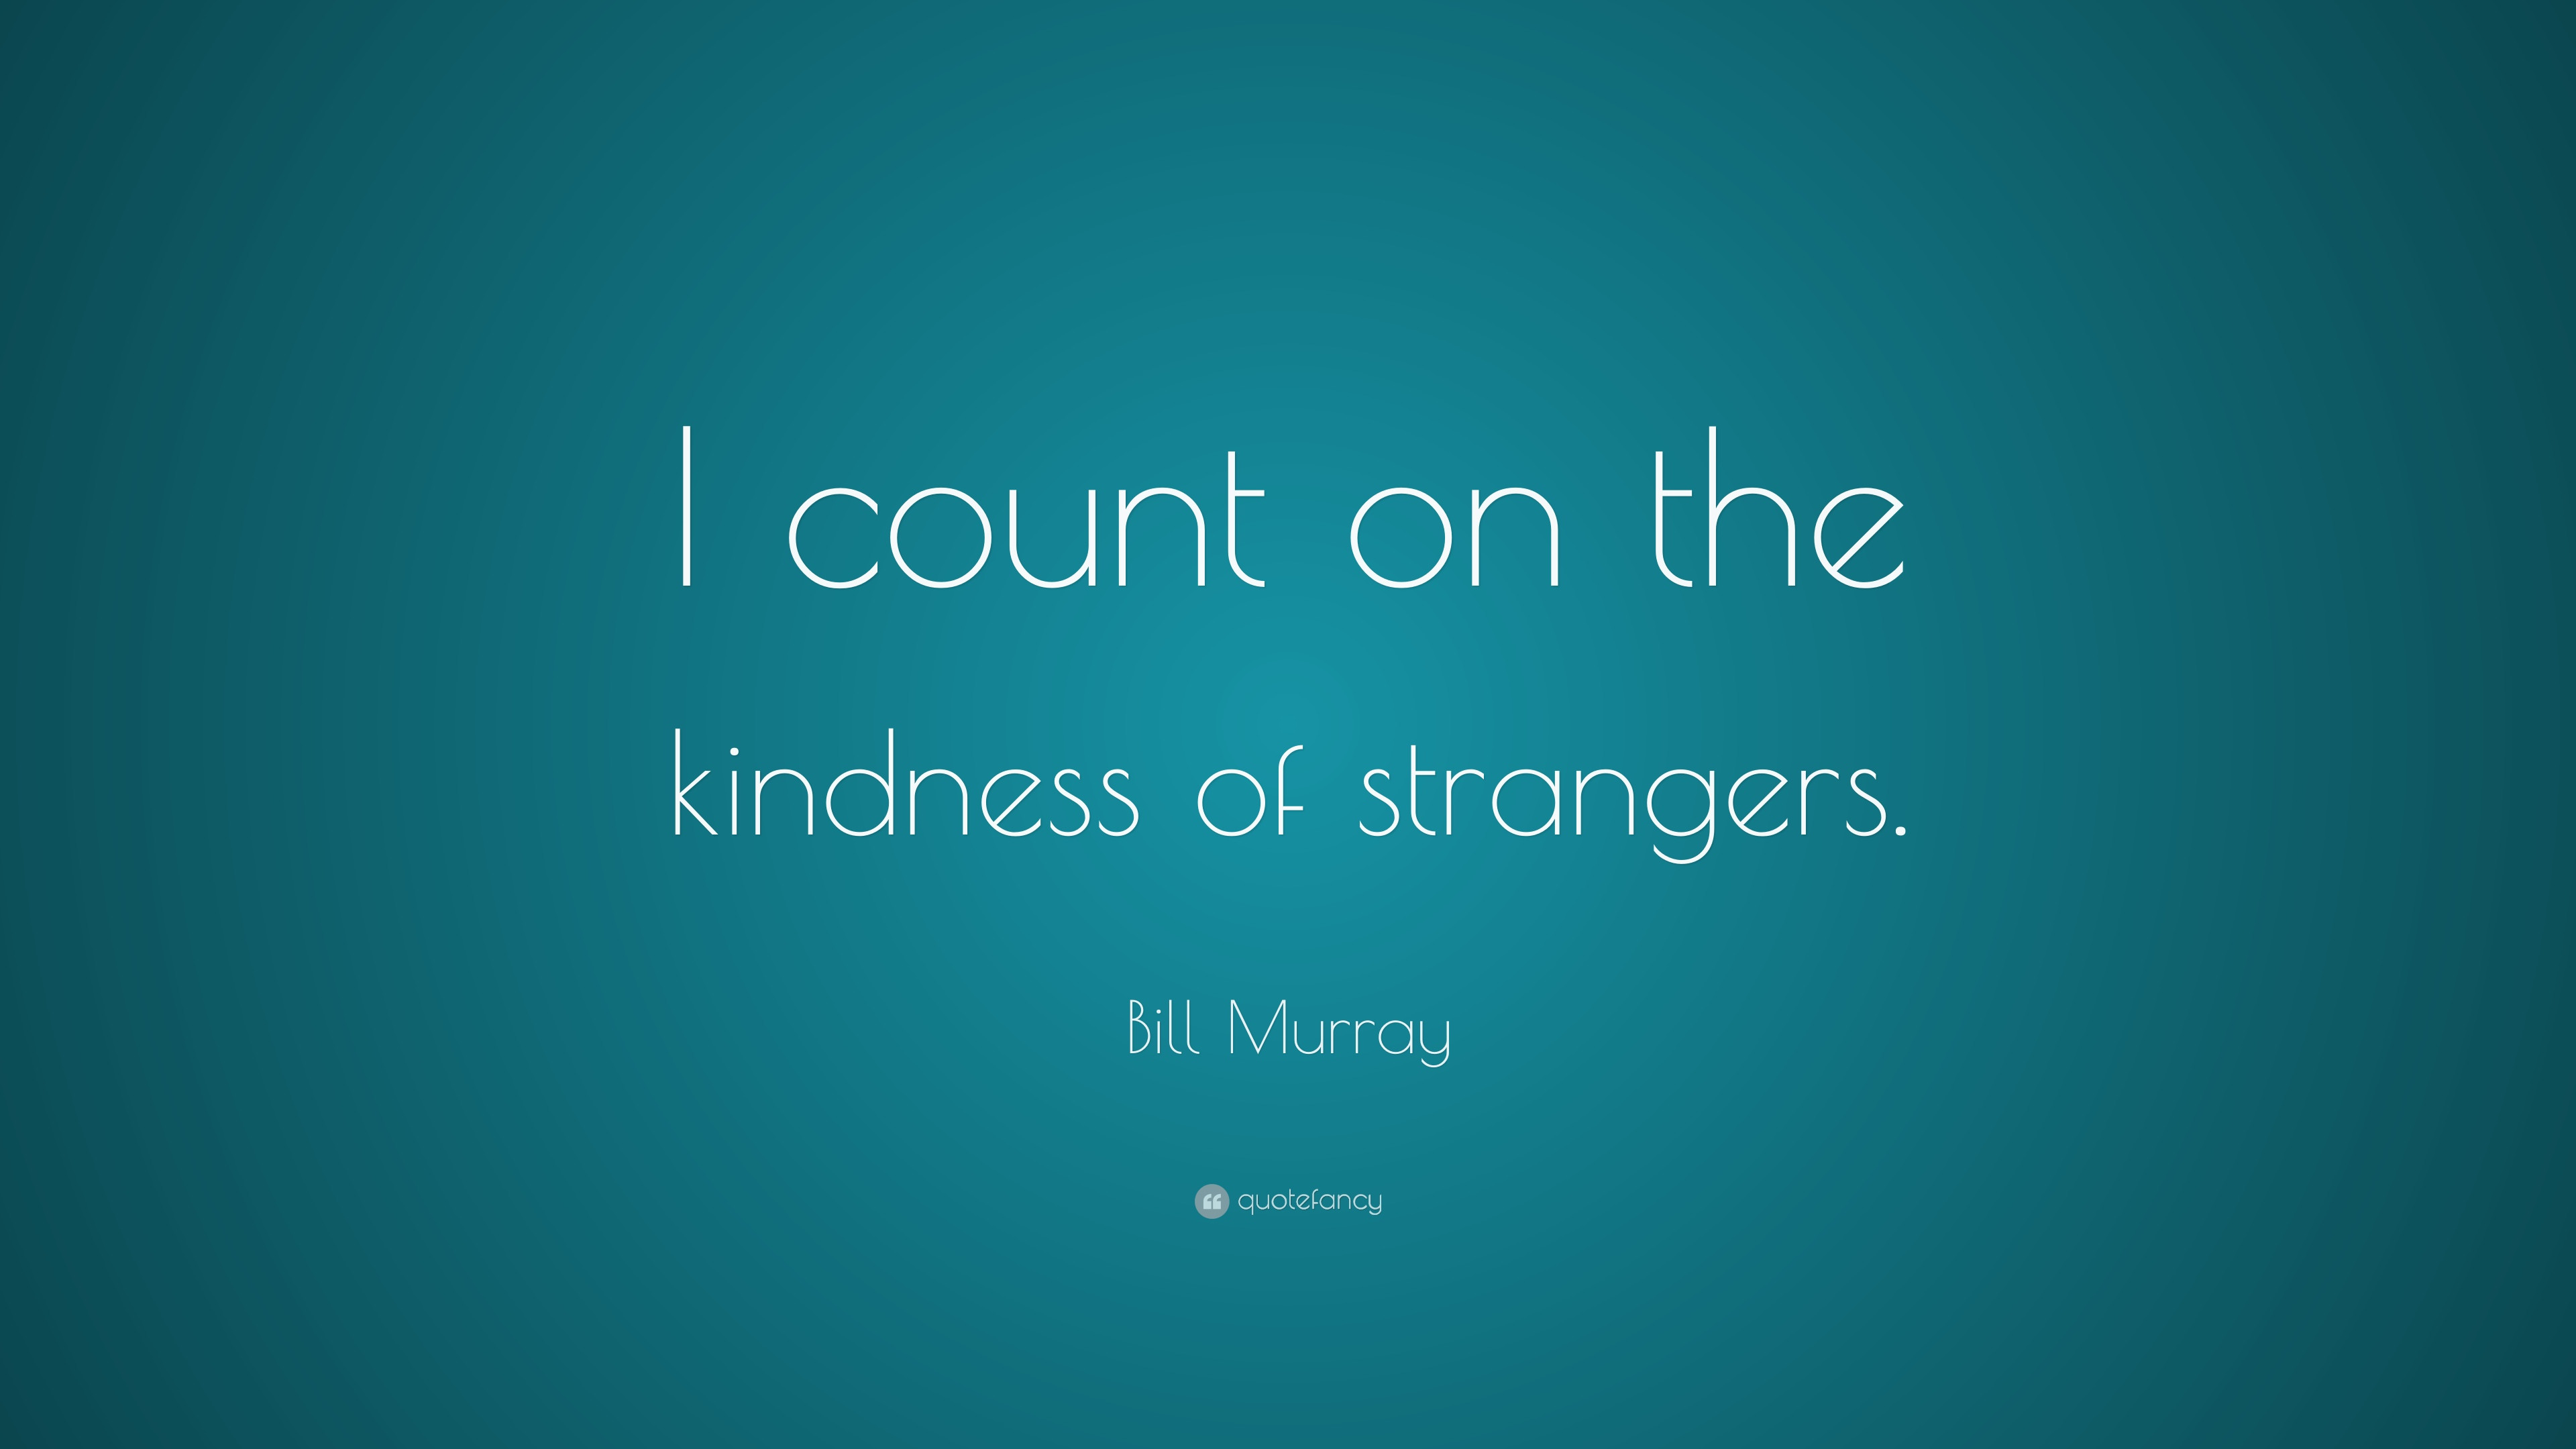 Kindness Of Strangers Quote
 Bill Murray Quotes 100 wallpapers Quotefancy